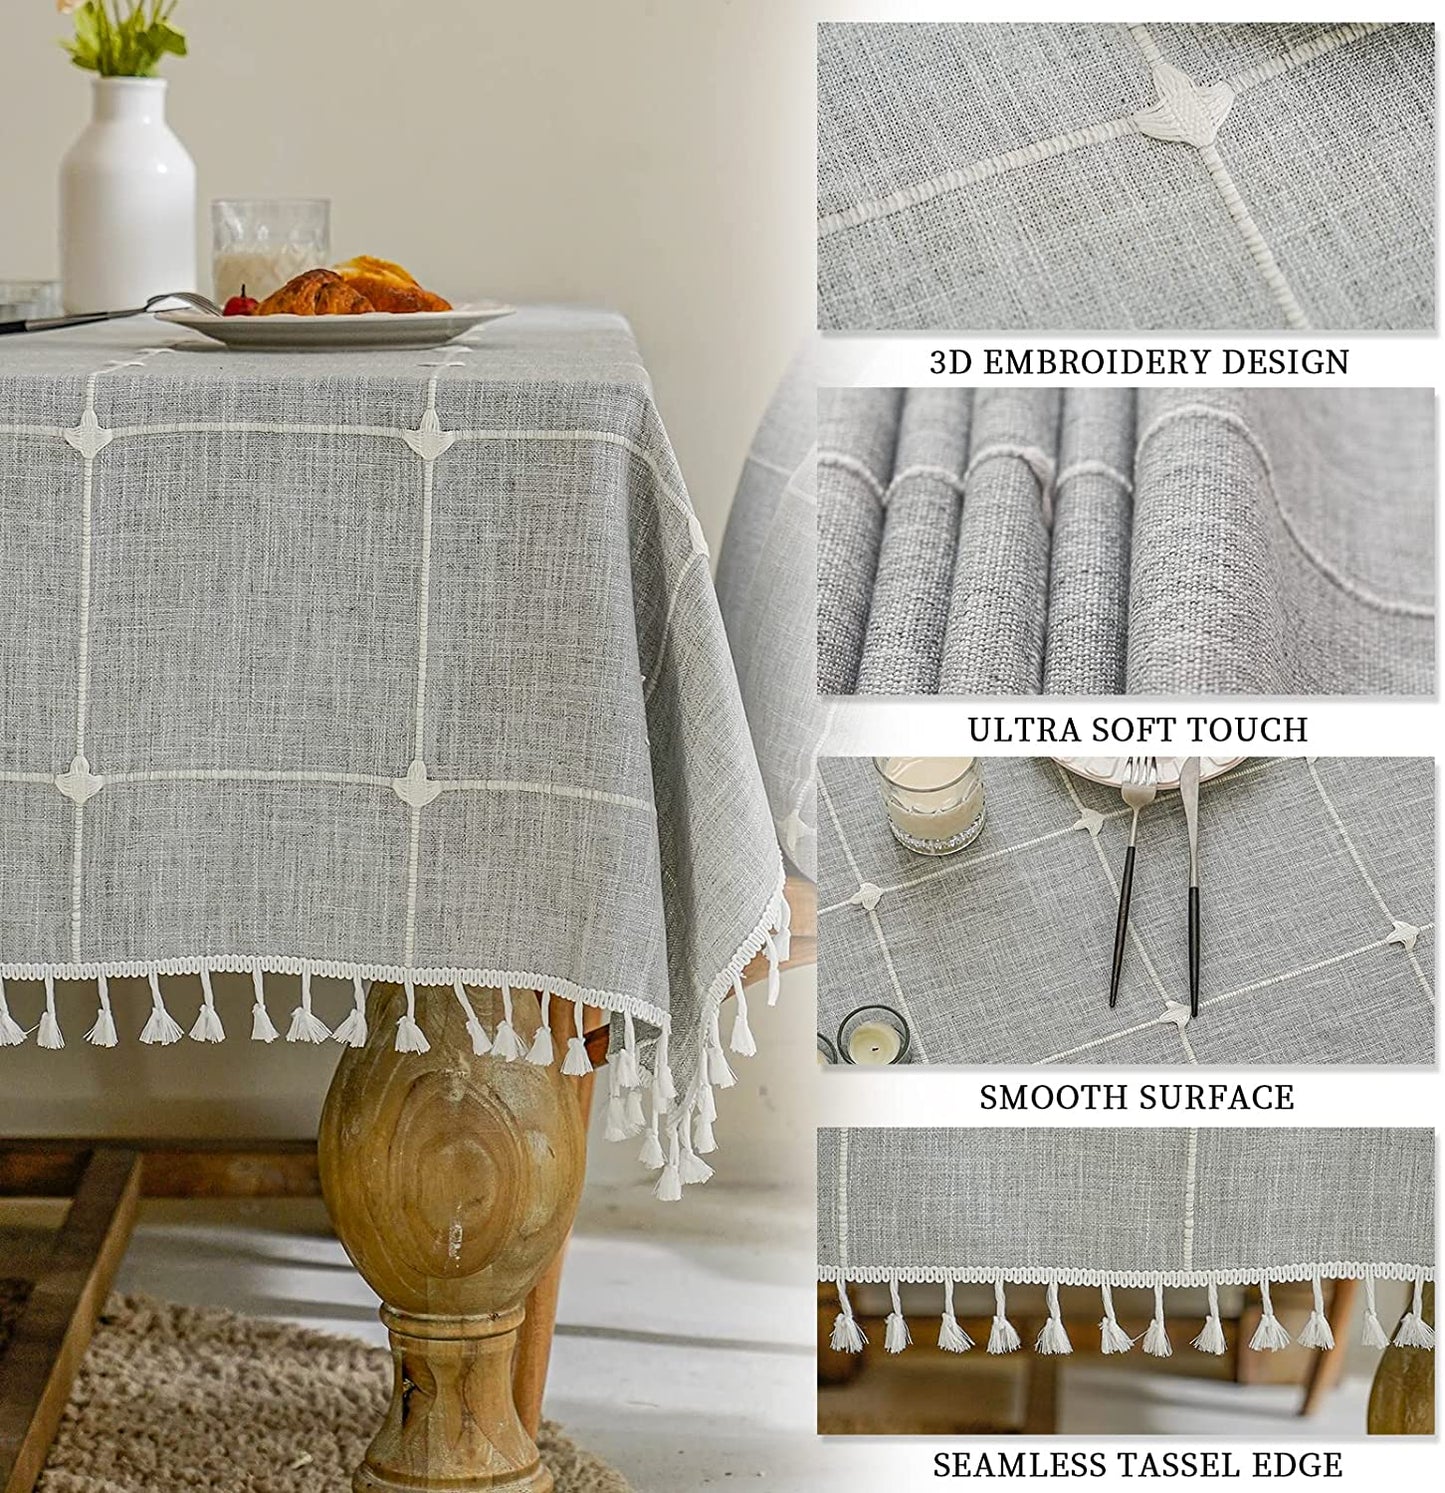 Mokani Solid Embroidery Checkered Table Cloth Washable Cotton Linen Tassel Tablecloth, Rectangle Wrinkle Free Anti-Fading Table Cover for Kitchen Dinning Thanksgiving Christmas (55 x 120 Inch, Gray) - (For 6 piece(s))